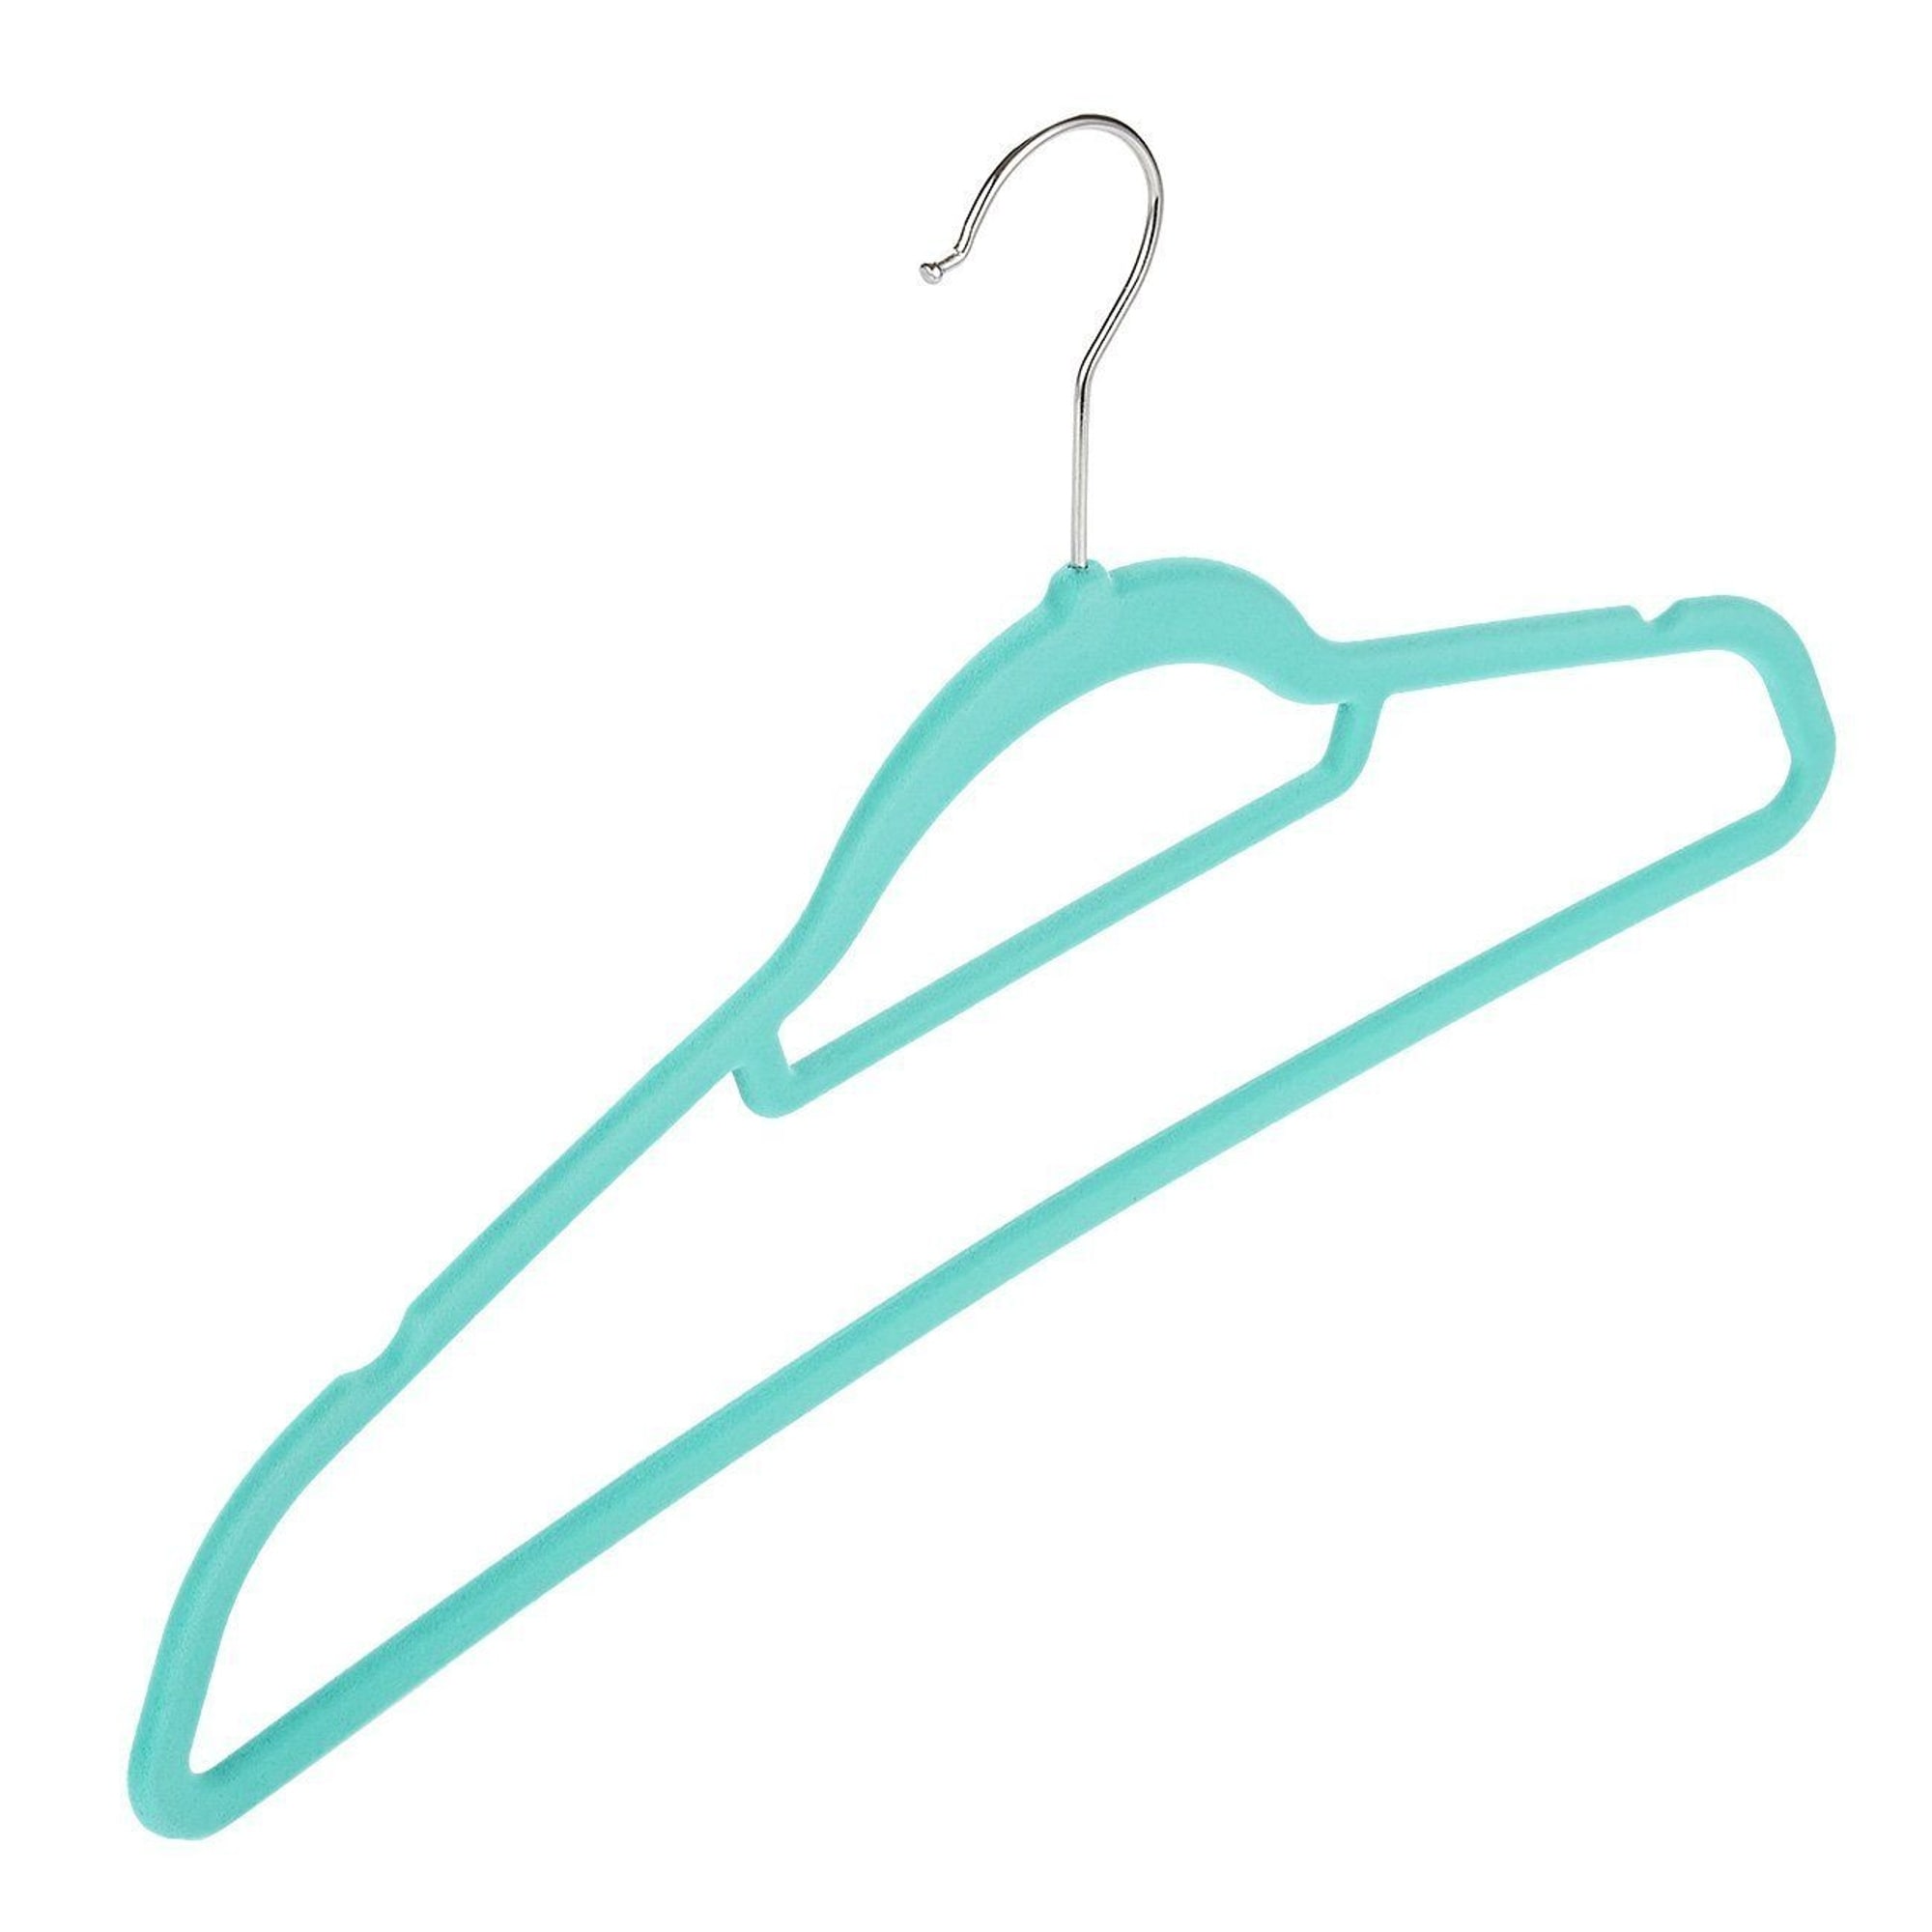 https://ak1.ostkcdn.com/images/products/is/images/direct/116b842a5982346dd919f4deb982a03138b9c668/50-Pack-Nonslip-Velvet-Hangers-with-Cascading-Hooks-for-Shirts%2C-Suits-and-Dresses-%28Teal%2C-18-In%29.jpg